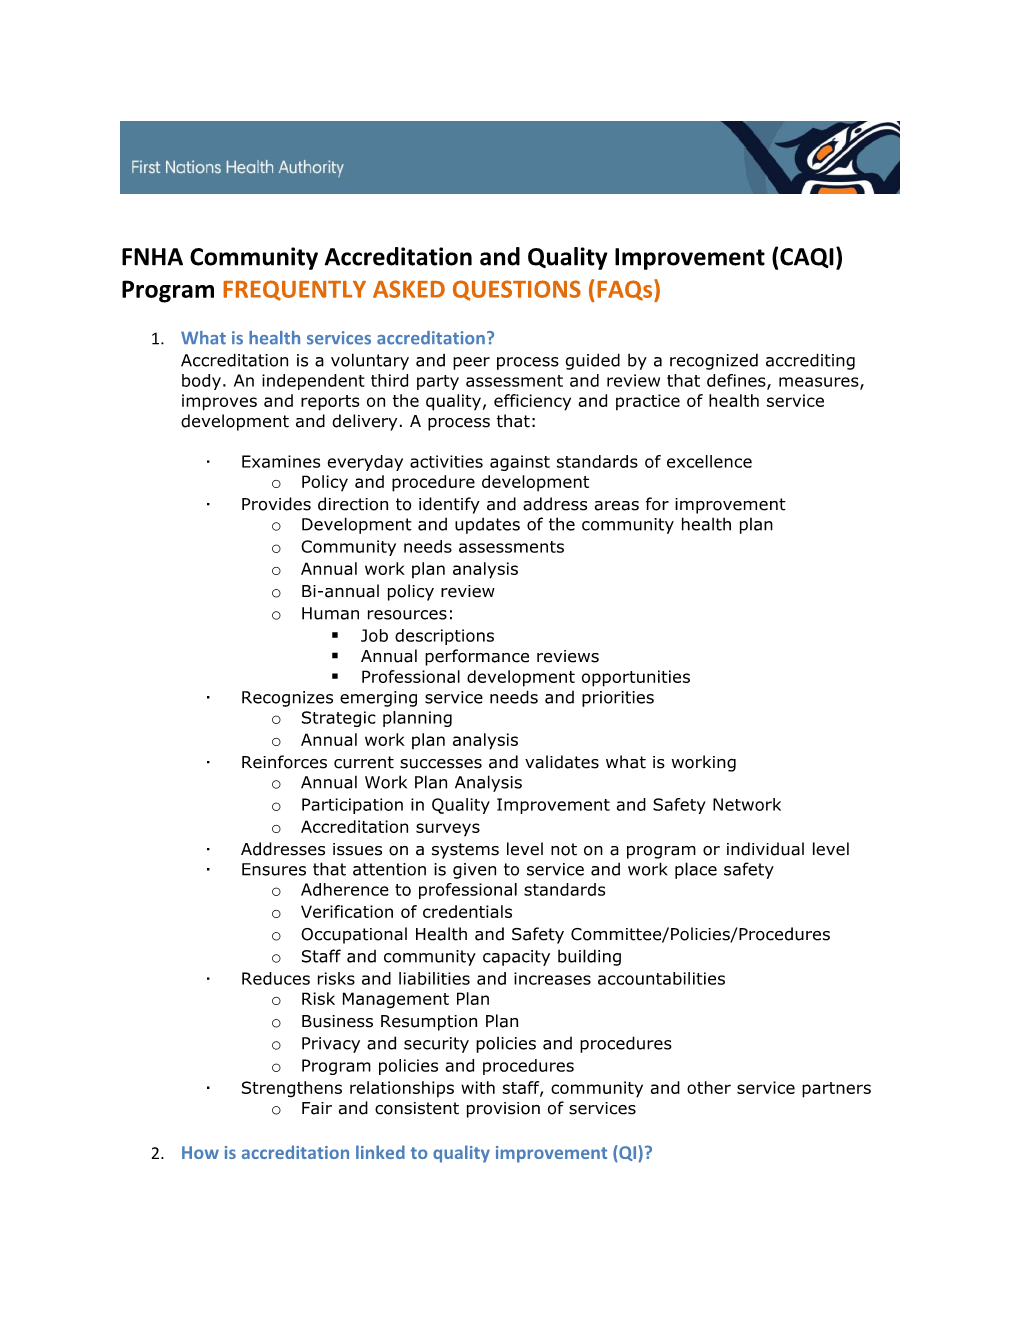 FNHA Community Accreditation and Quality Improvement (CAQI) Programfrequently ASKED QUESTIONS